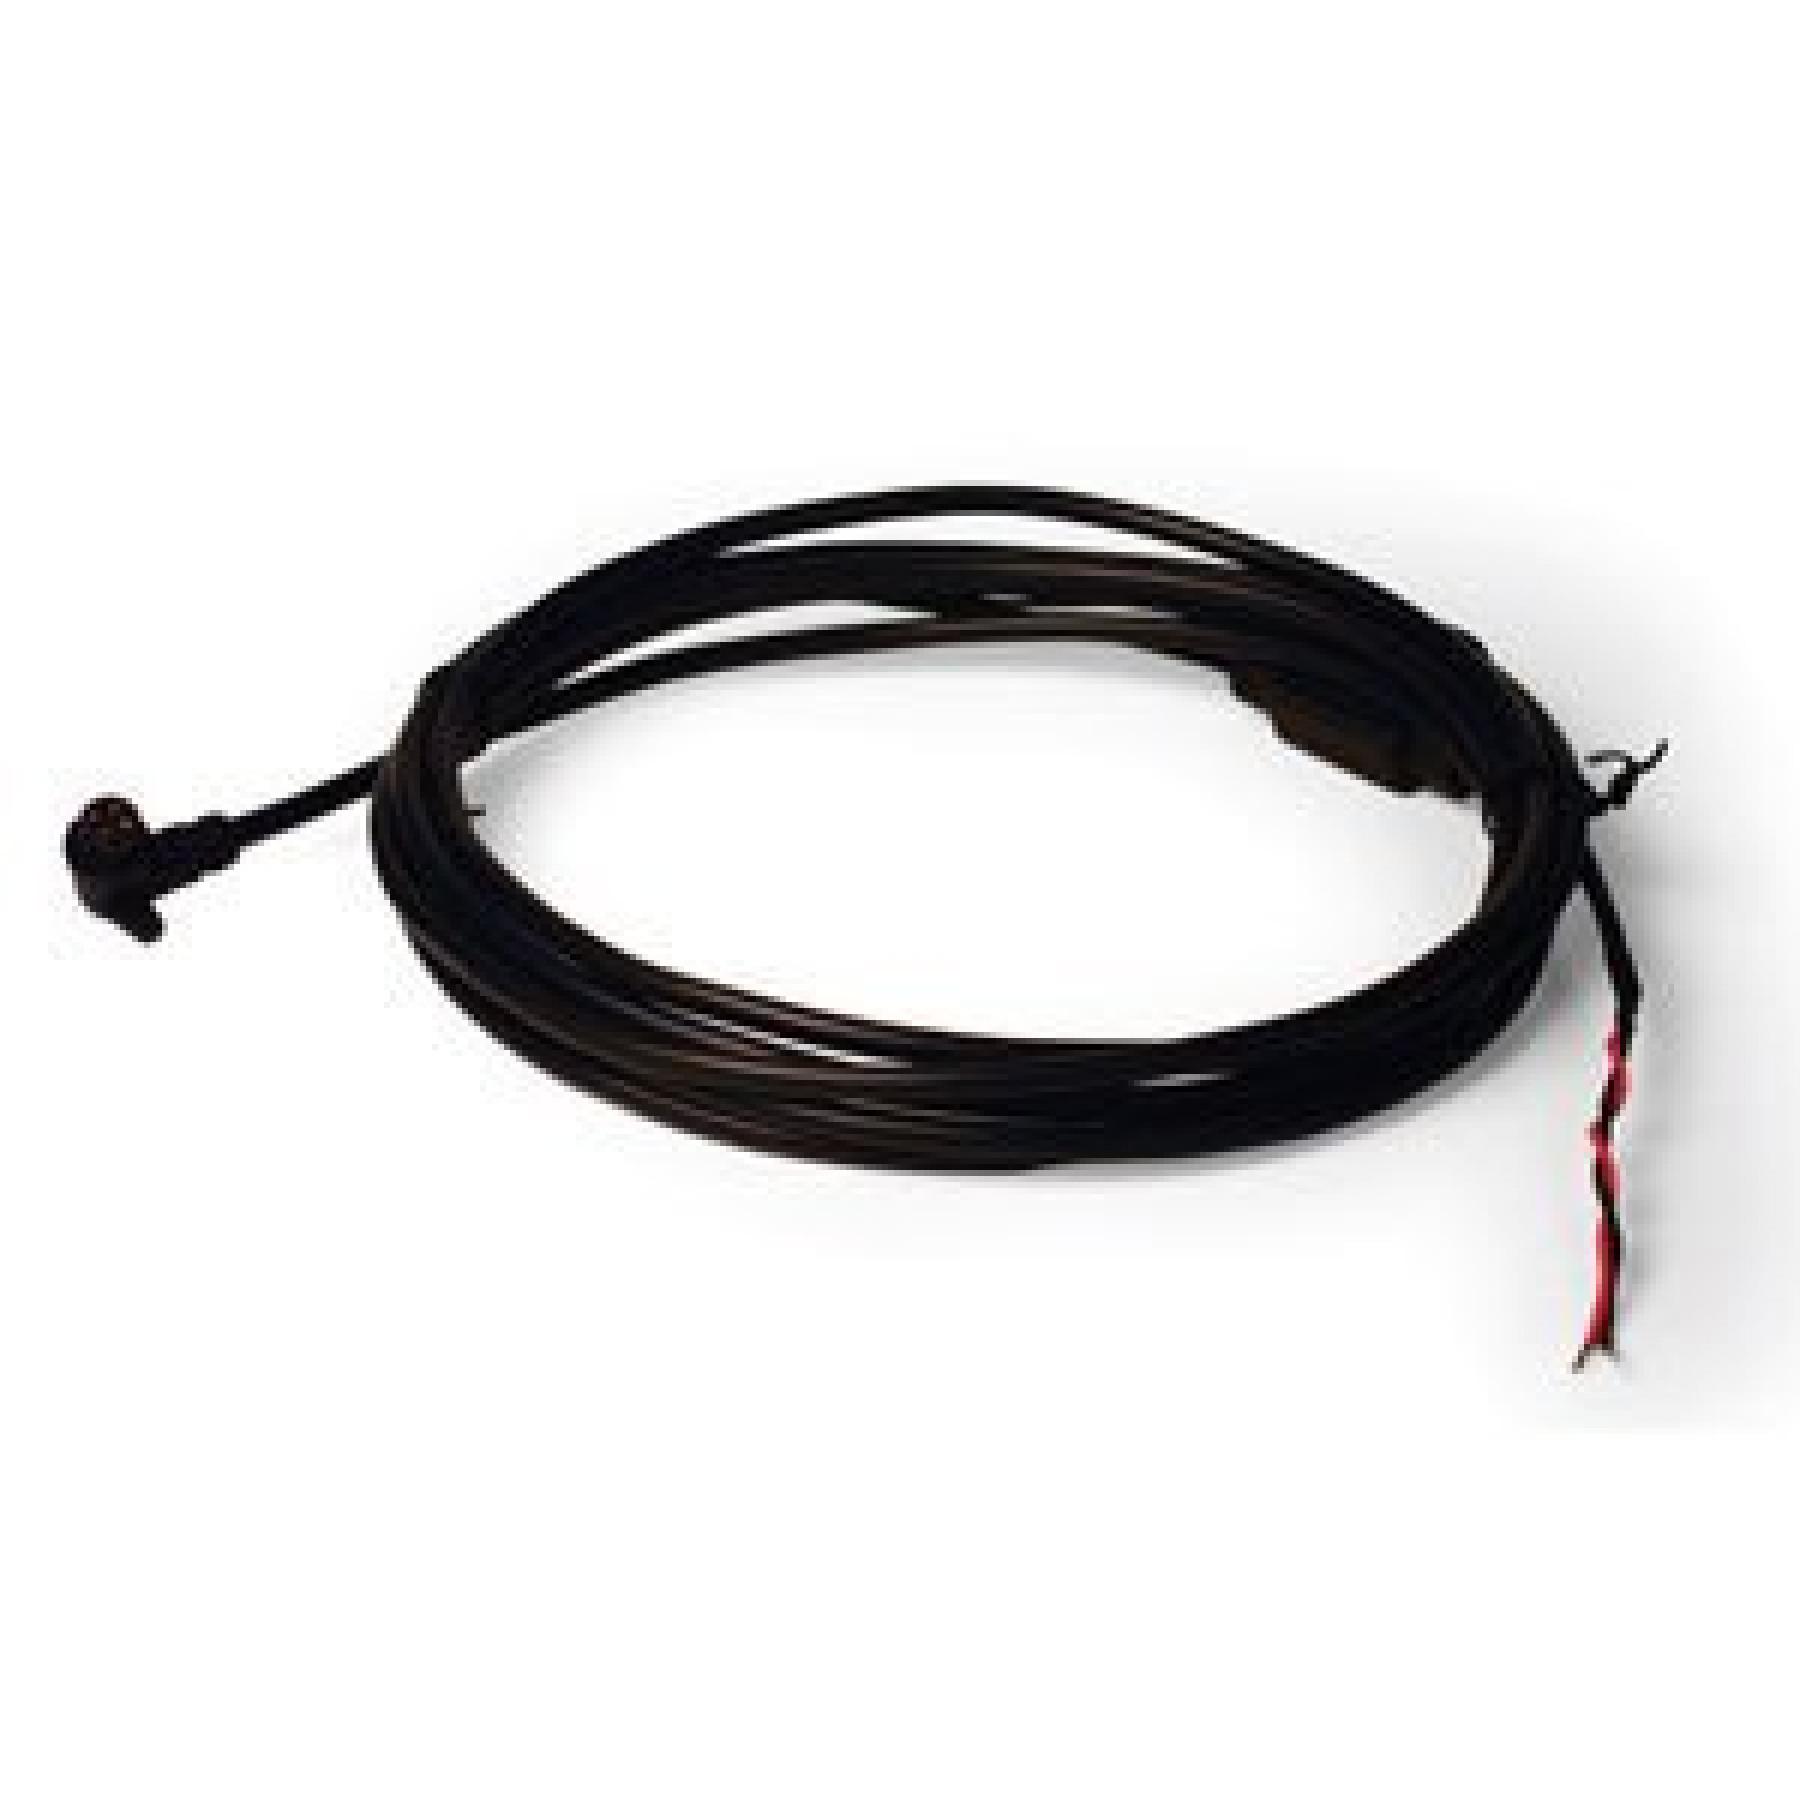 Cable Garmin power cable